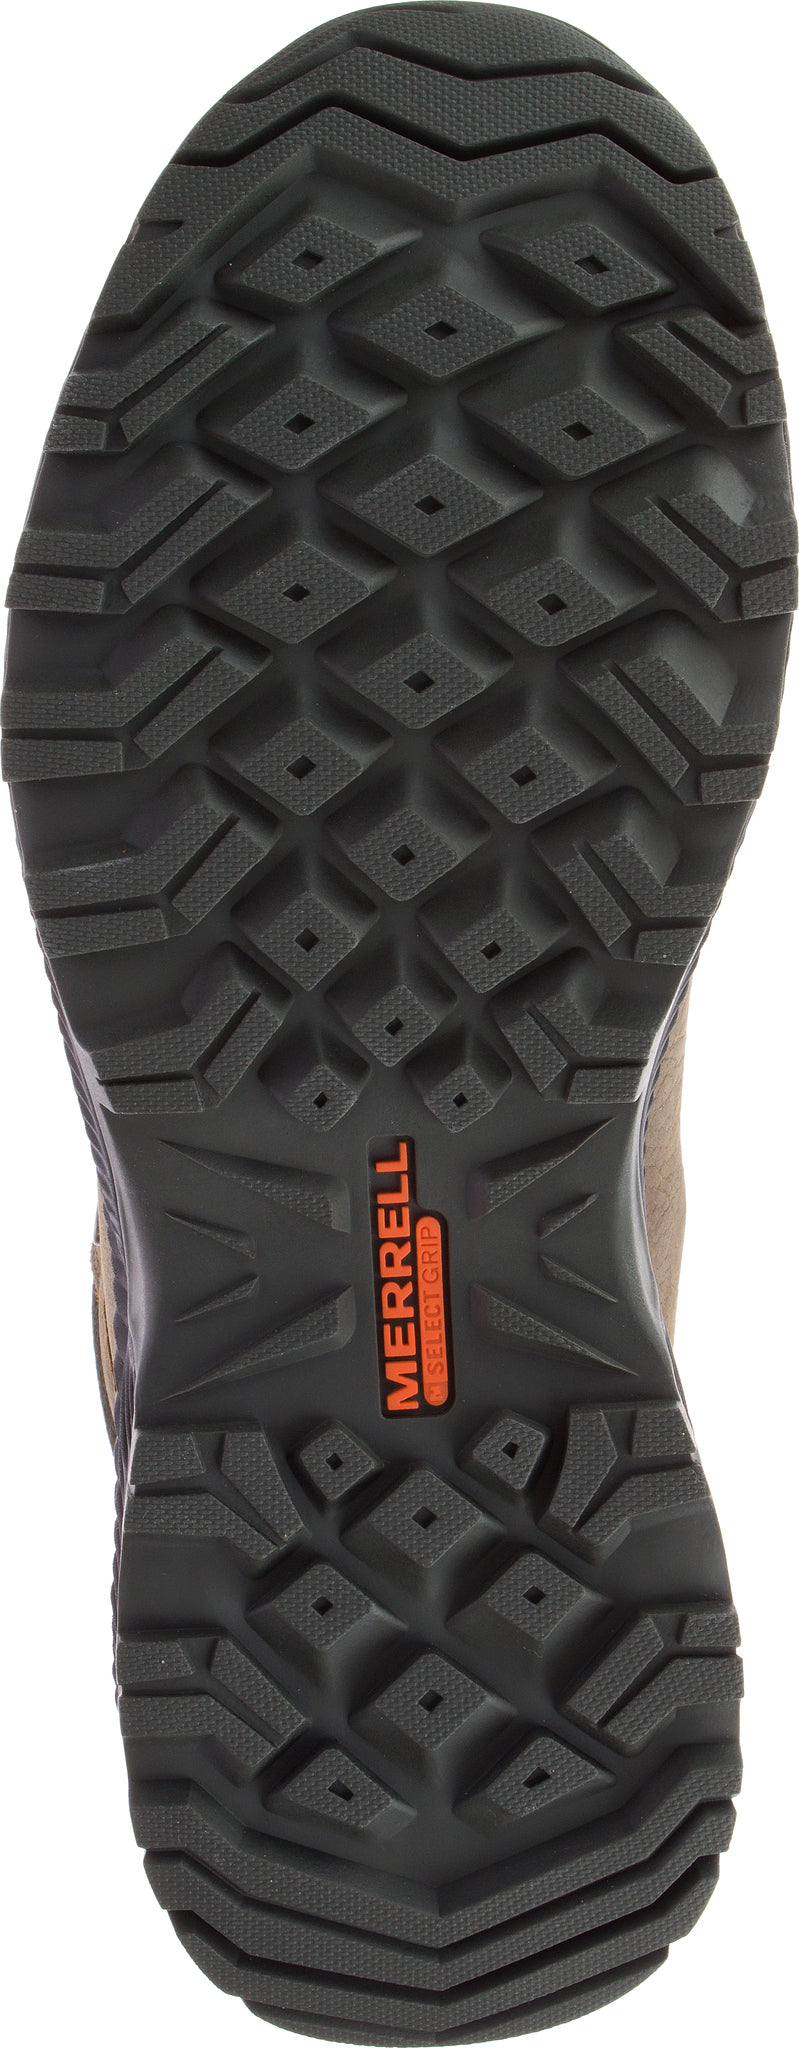 merrell forestbound mid wp